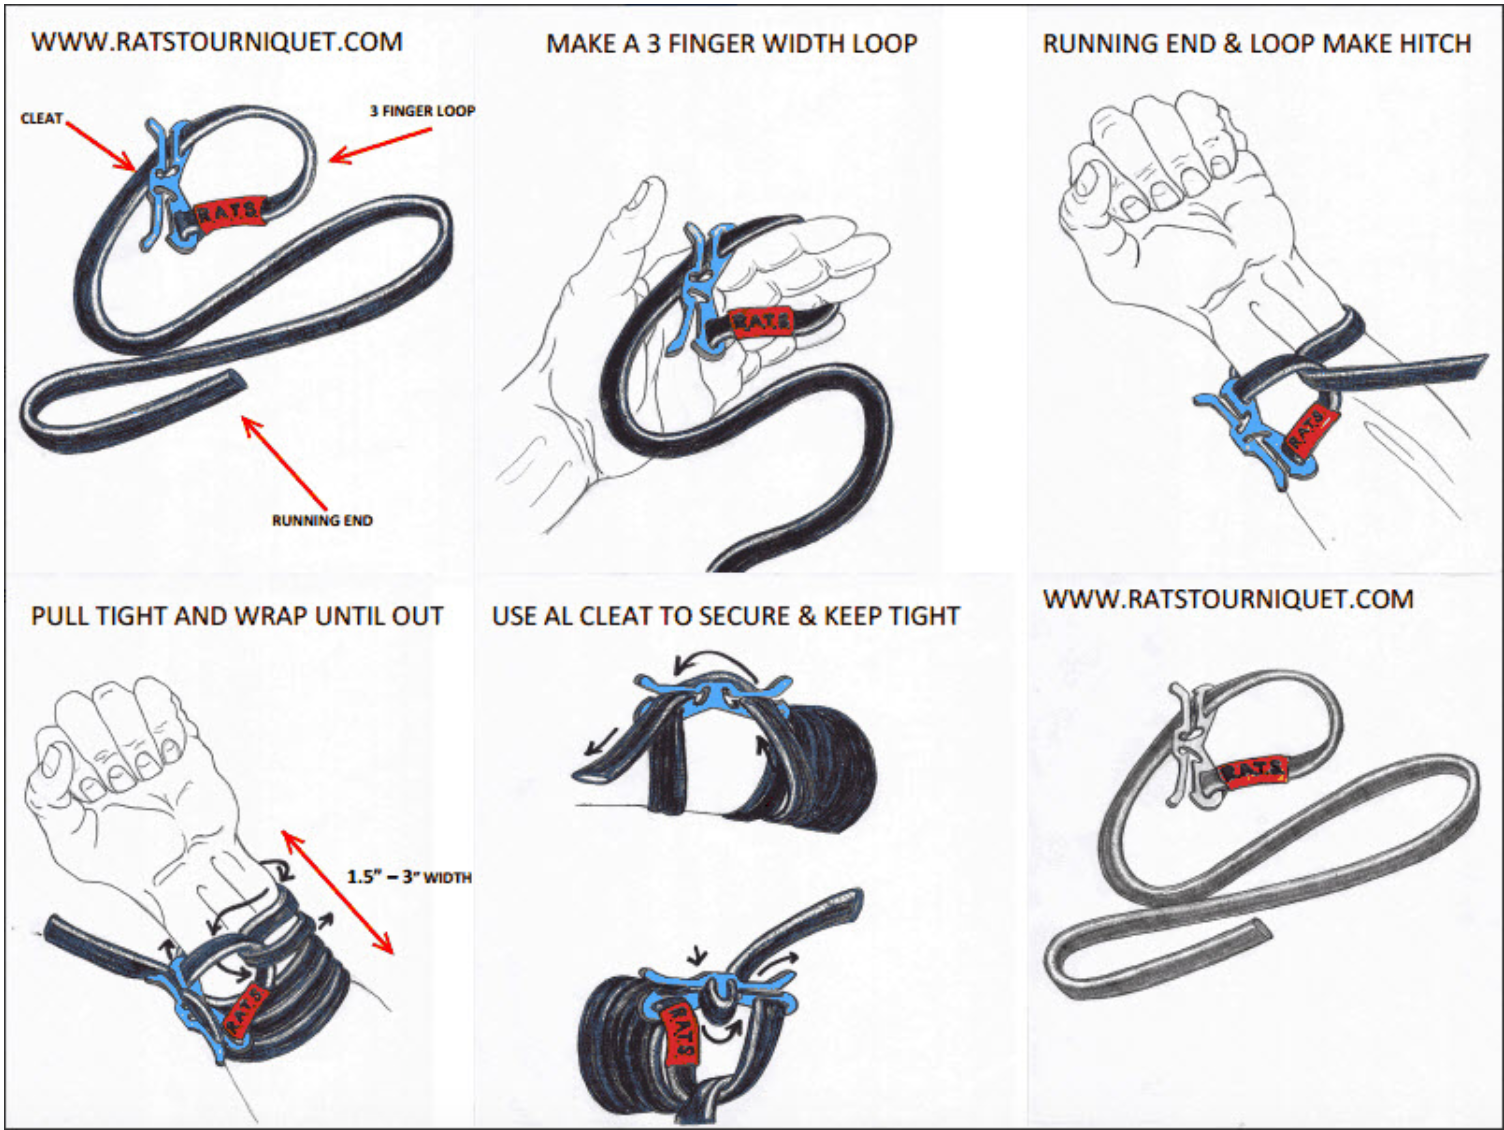 Tourniquet Rope Release First Aid Emergency Survival - Badger Survival Online